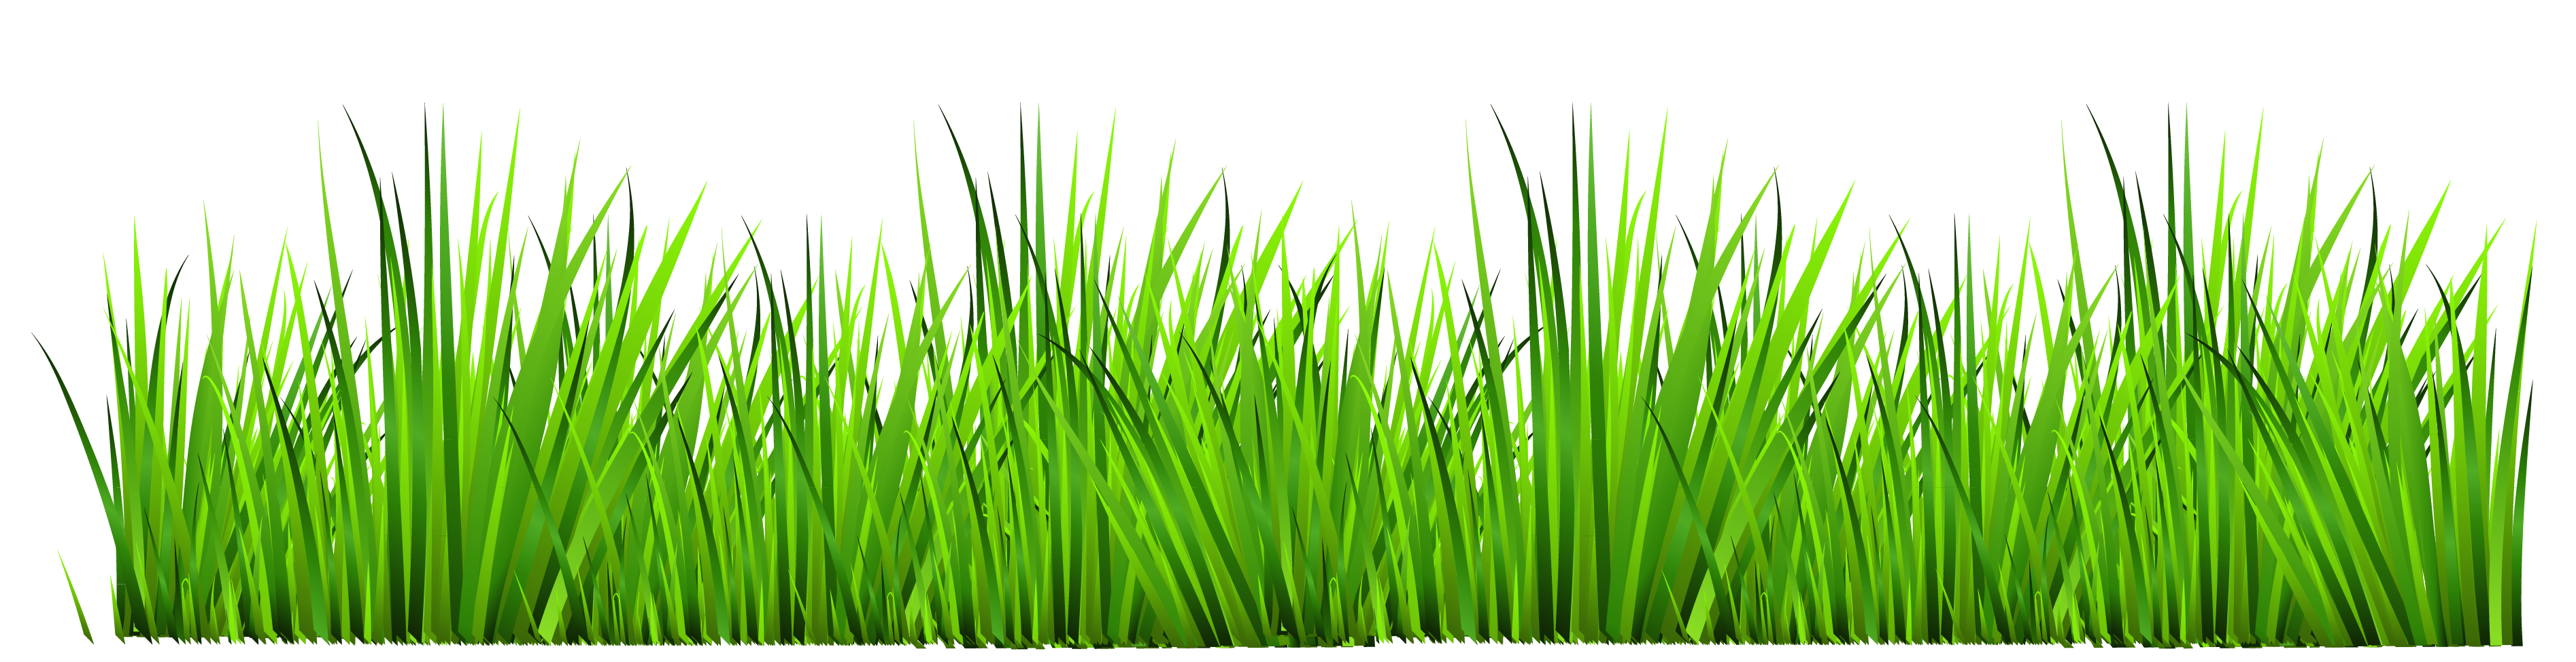 Free cliparts download clip. Dirt clipart grass